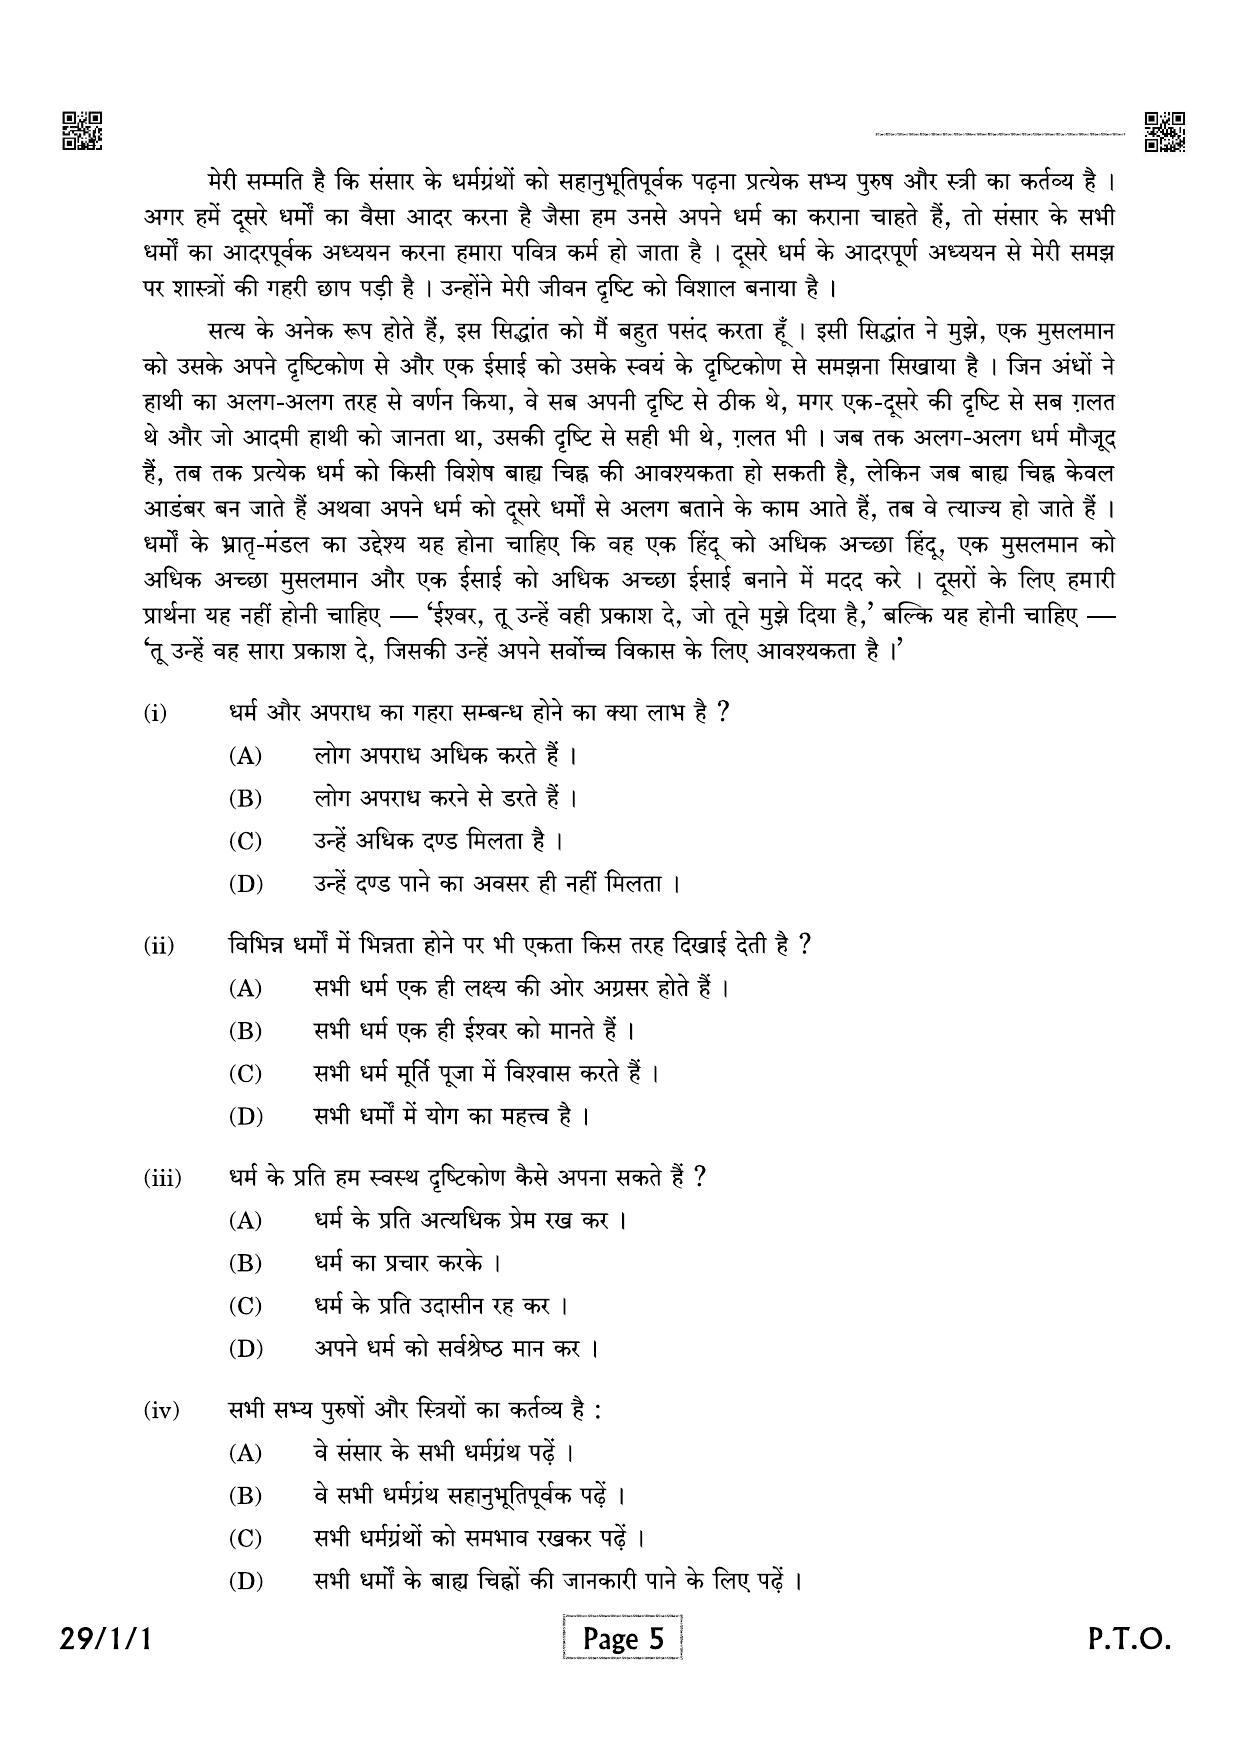 CBSE Class 12 QP_002_HINDI_ELECTIVE 2021 Compartment Question Paper - Page 5